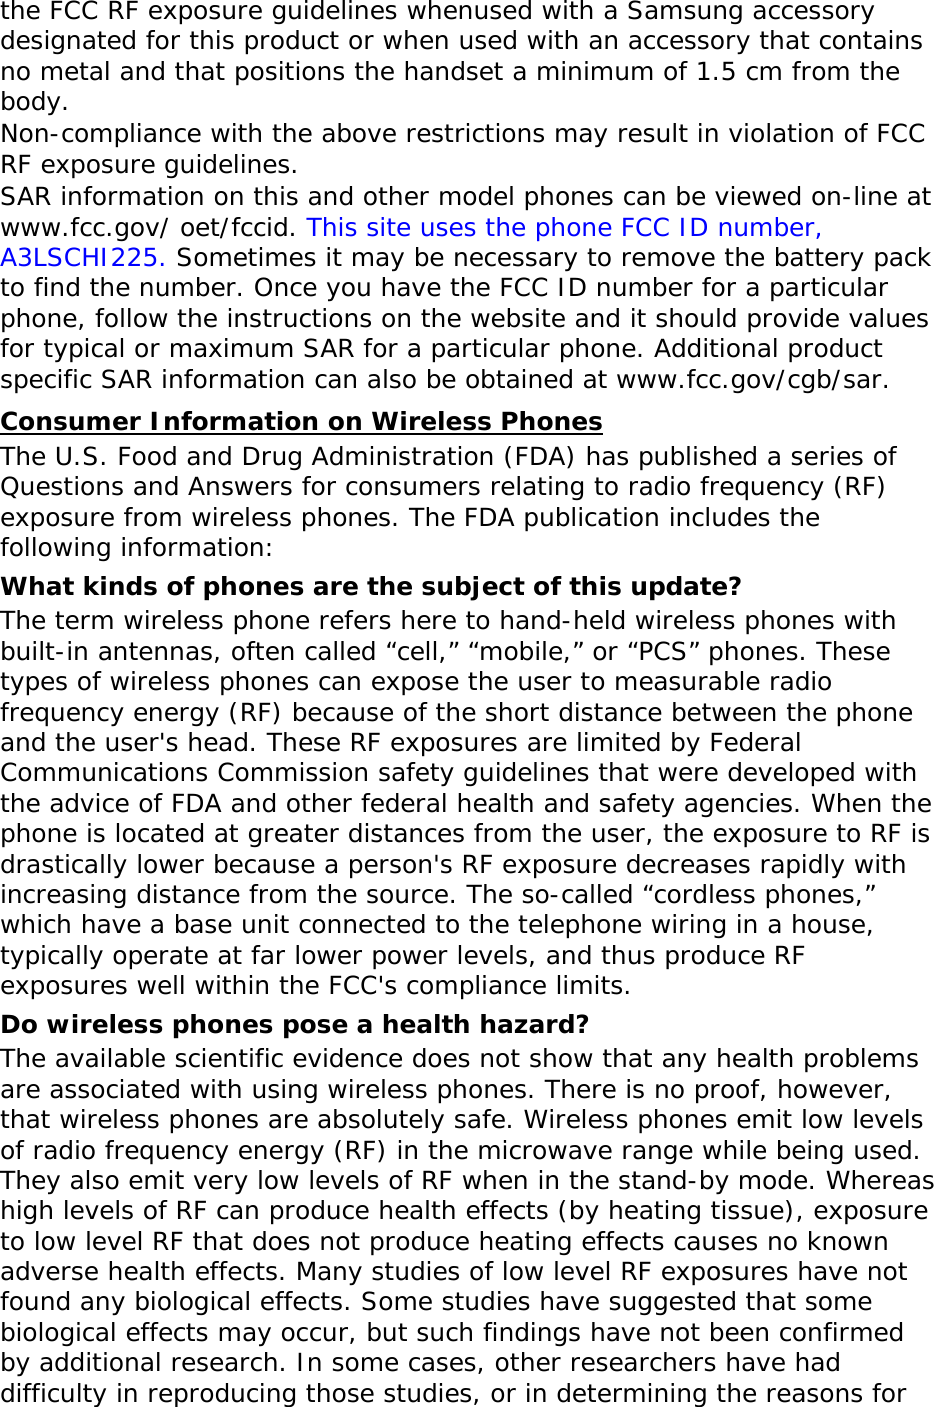 the FCC RF exposure guidelines whenused with a Samsung accessory designated for this product or when used with an accessory that contains no metal and that positions the handset a minimum of 1.5 cm from the body.  Non-compliance with the above restrictions may result in violation of FCC RF exposure guidelines. SAR information on this and other model phones can be viewed on-line at www.fcc.gov/ oet/fccid. This site uses the phone FCC ID number, A3LSCHI225. Sometimes it may be necessary to remove the battery pack to find the number. Once you have the FCC ID number for a particular phone, follow the instructions on the website and it should provide values for typical or maximum SAR for a particular phone. Additional product specific SAR information can also be obtained at www.fcc.gov/cgb/sar. Consumer Information on Wireless Phones The U.S. Food and Drug Administration (FDA) has published a series of Questions and Answers for consumers relating to radio frequency (RF) exposure from wireless phones. The FDA publication includes the following information: What kinds of phones are the subject of this update? The term wireless phone refers here to hand-held wireless phones with built-in antennas, often called “cell,” “mobile,” or “PCS” phones. These types of wireless phones can expose the user to measurable radio frequency energy (RF) because of the short distance between the phone and the user&apos;s head. These RF exposures are limited by Federal Communications Commission safety guidelines that were developed with the advice of FDA and other federal health and safety agencies. When the phone is located at greater distances from the user, the exposure to RF is drastically lower because a person&apos;s RF exposure decreases rapidly with increasing distance from the source. The so-called “cordless phones,” which have a base unit connected to the telephone wiring in a house, typically operate at far lower power levels, and thus produce RF exposures well within the FCC&apos;s compliance limits. Do wireless phones pose a health hazard? The available scientific evidence does not show that any health problems are associated with using wireless phones. There is no proof, however, that wireless phones are absolutely safe. Wireless phones emit low levels of radio frequency energy (RF) in the microwave range while being used. They also emit very low levels of RF when in the stand-by mode. Whereas high levels of RF can produce health effects (by heating tissue), exposure to low level RF that does not produce heating effects causes no known adverse health effects. Many studies of low level RF exposures have not found any biological effects. Some studies have suggested that some biological effects may occur, but such findings have not been confirmed by additional research. In some cases, other researchers have had difficulty in reproducing those studies, or in determining the reasons for 